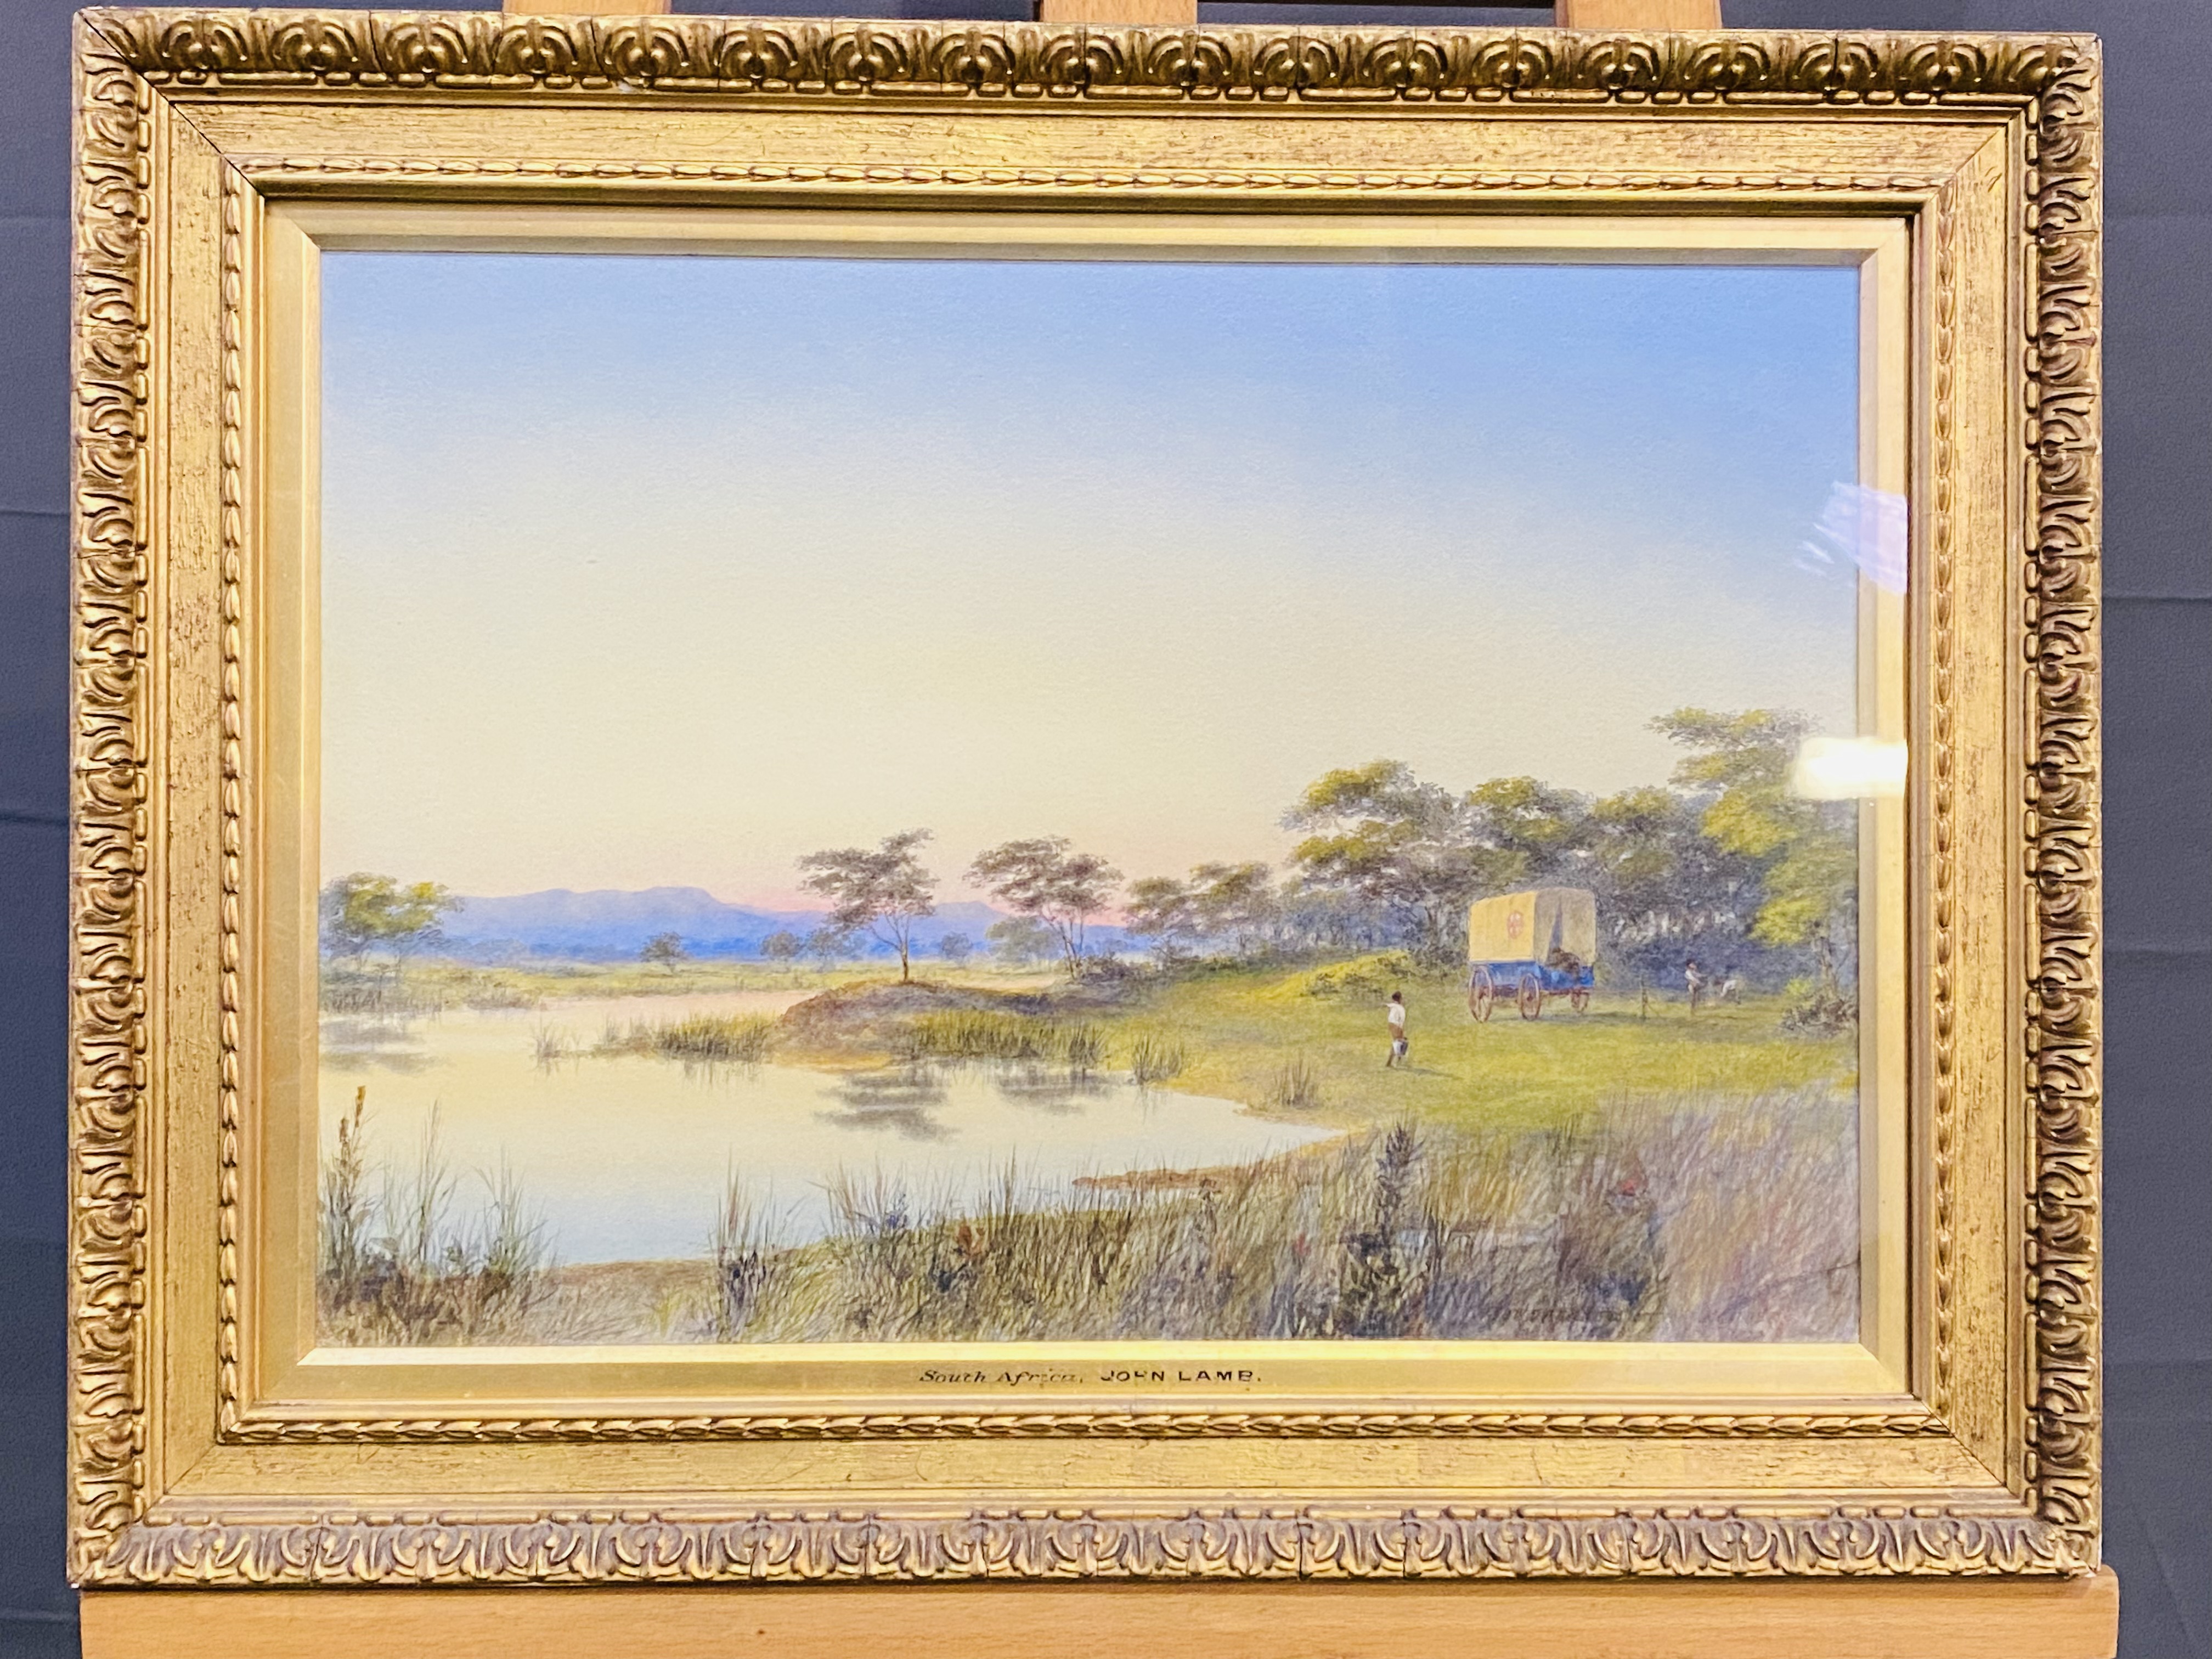 Framed and glazed watercolour witten to mount 'South Africa John Lamb' - Image 2 of 4